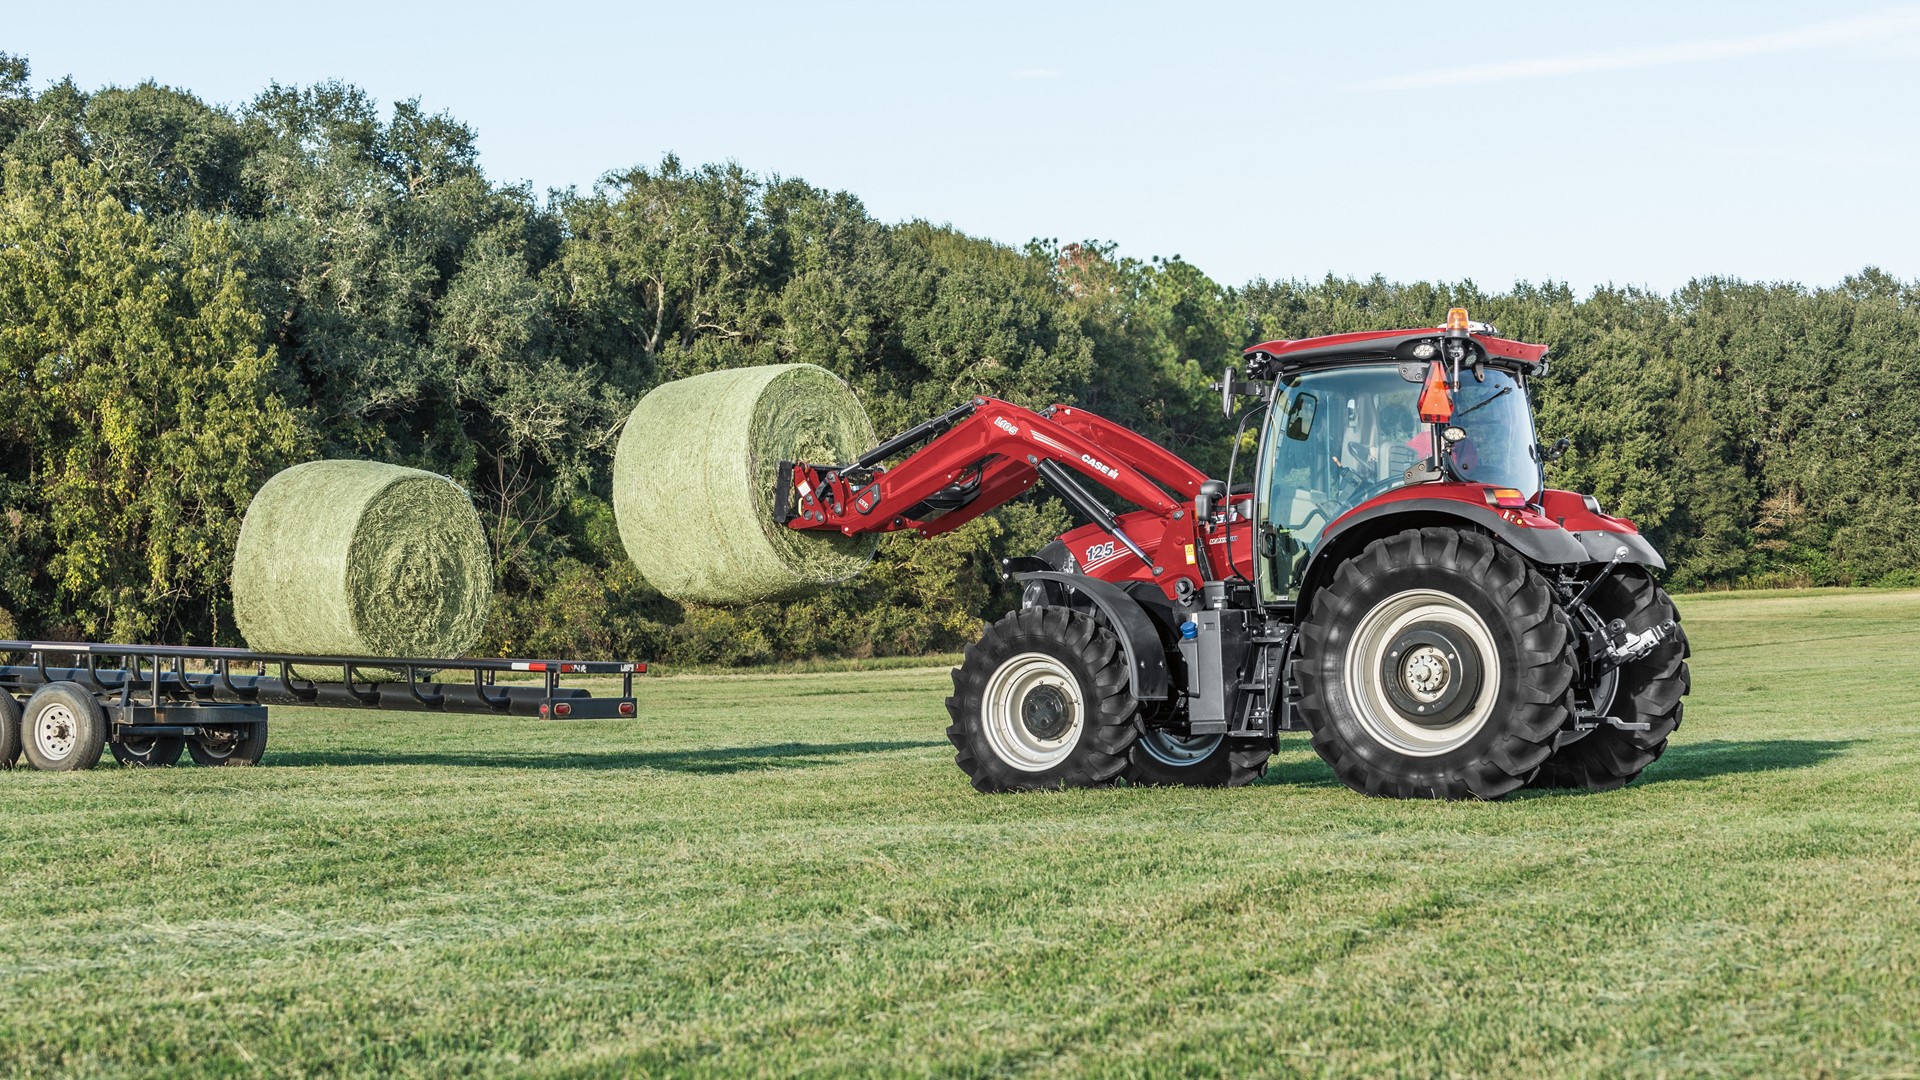 More-efficient hydraulics and outstanding visibility with the new Case IH L10 series loaders